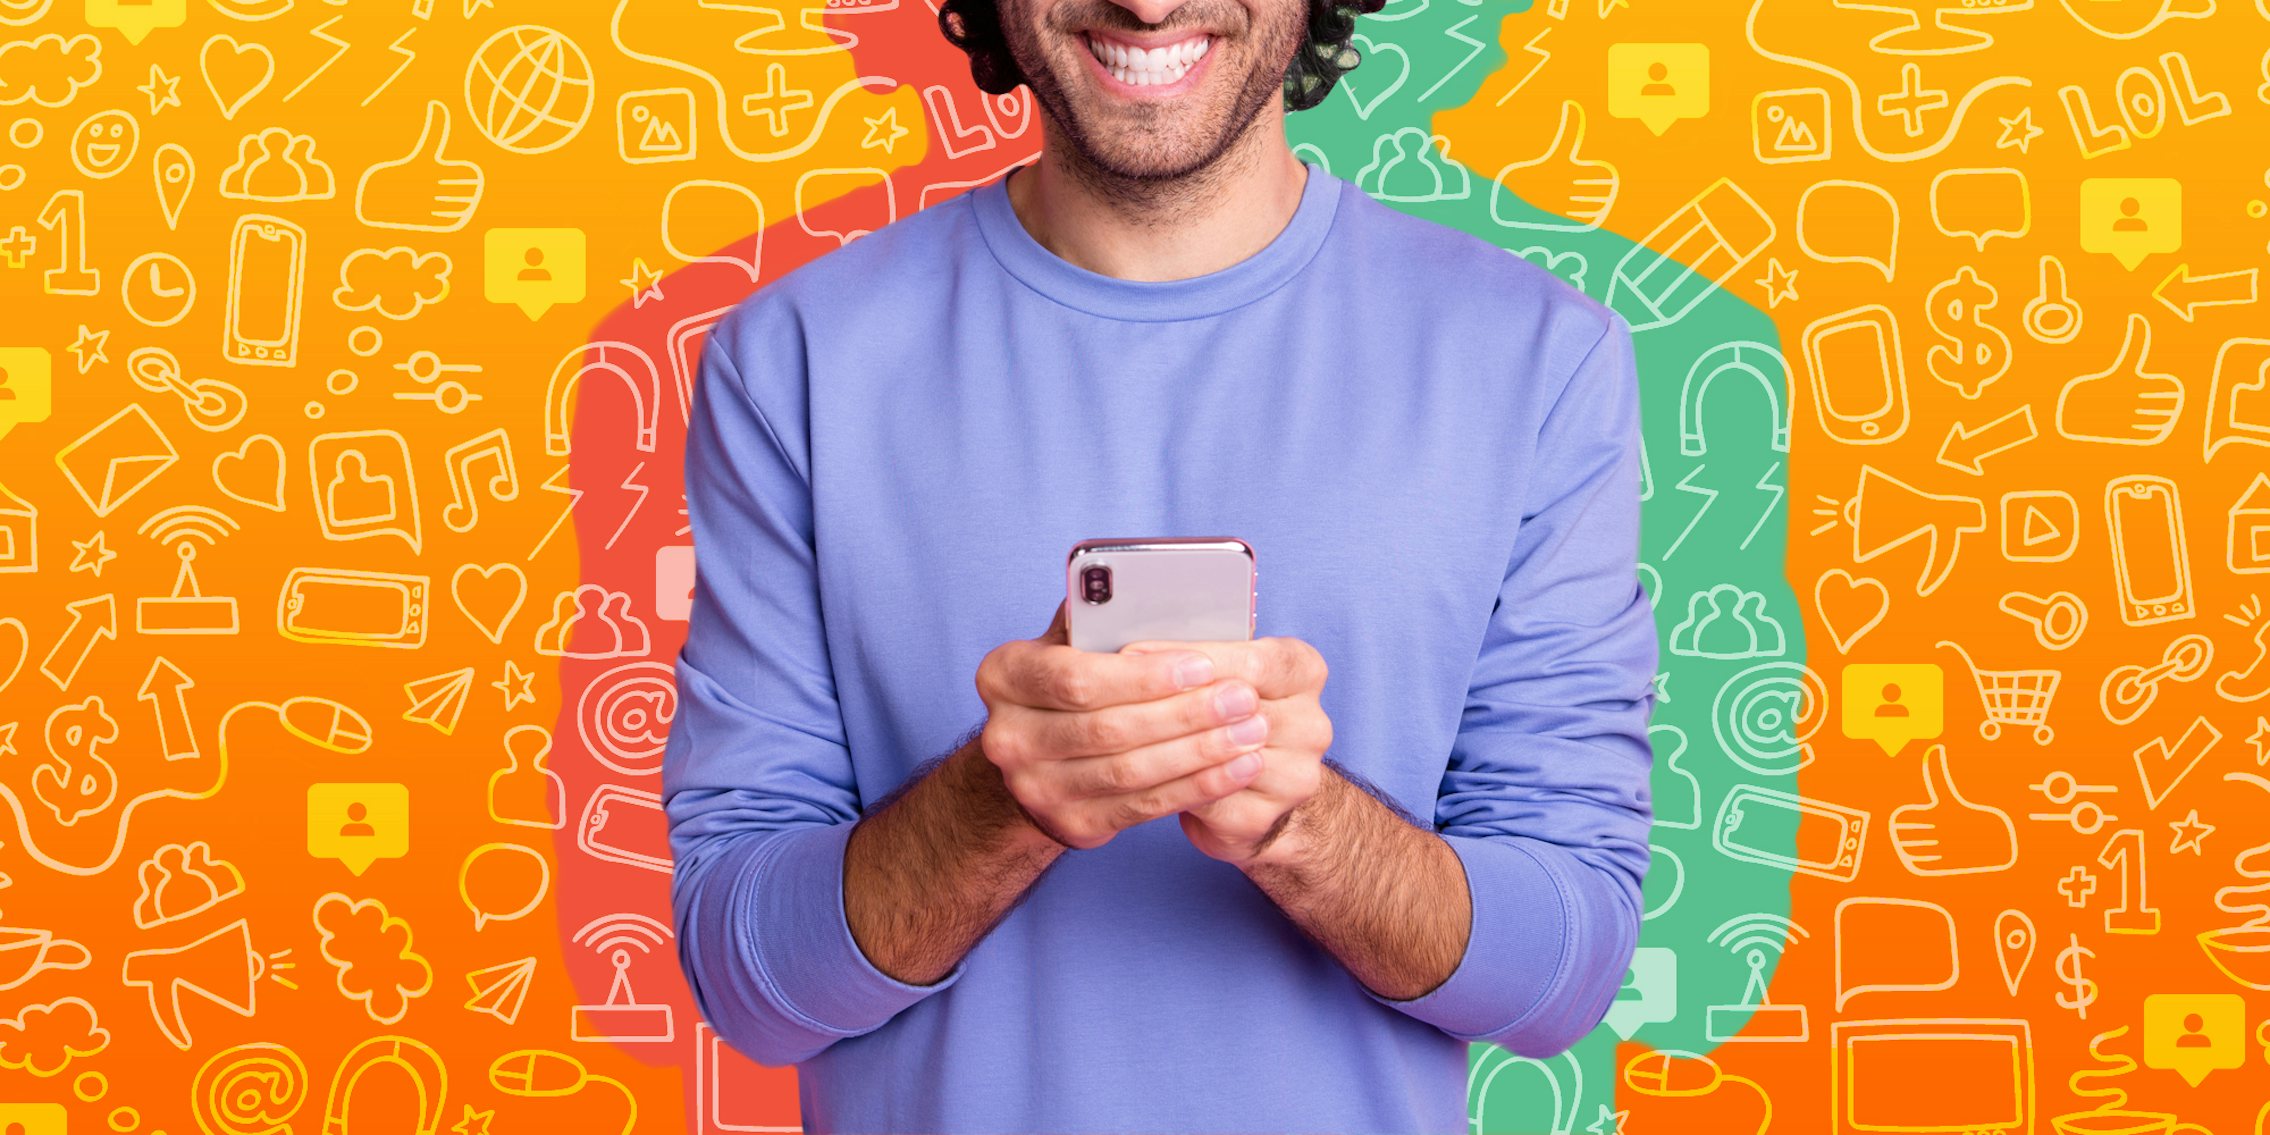 smiling man holding phone in front of yellow to orange vertical gradient social media doodles background Passionfruit Remix